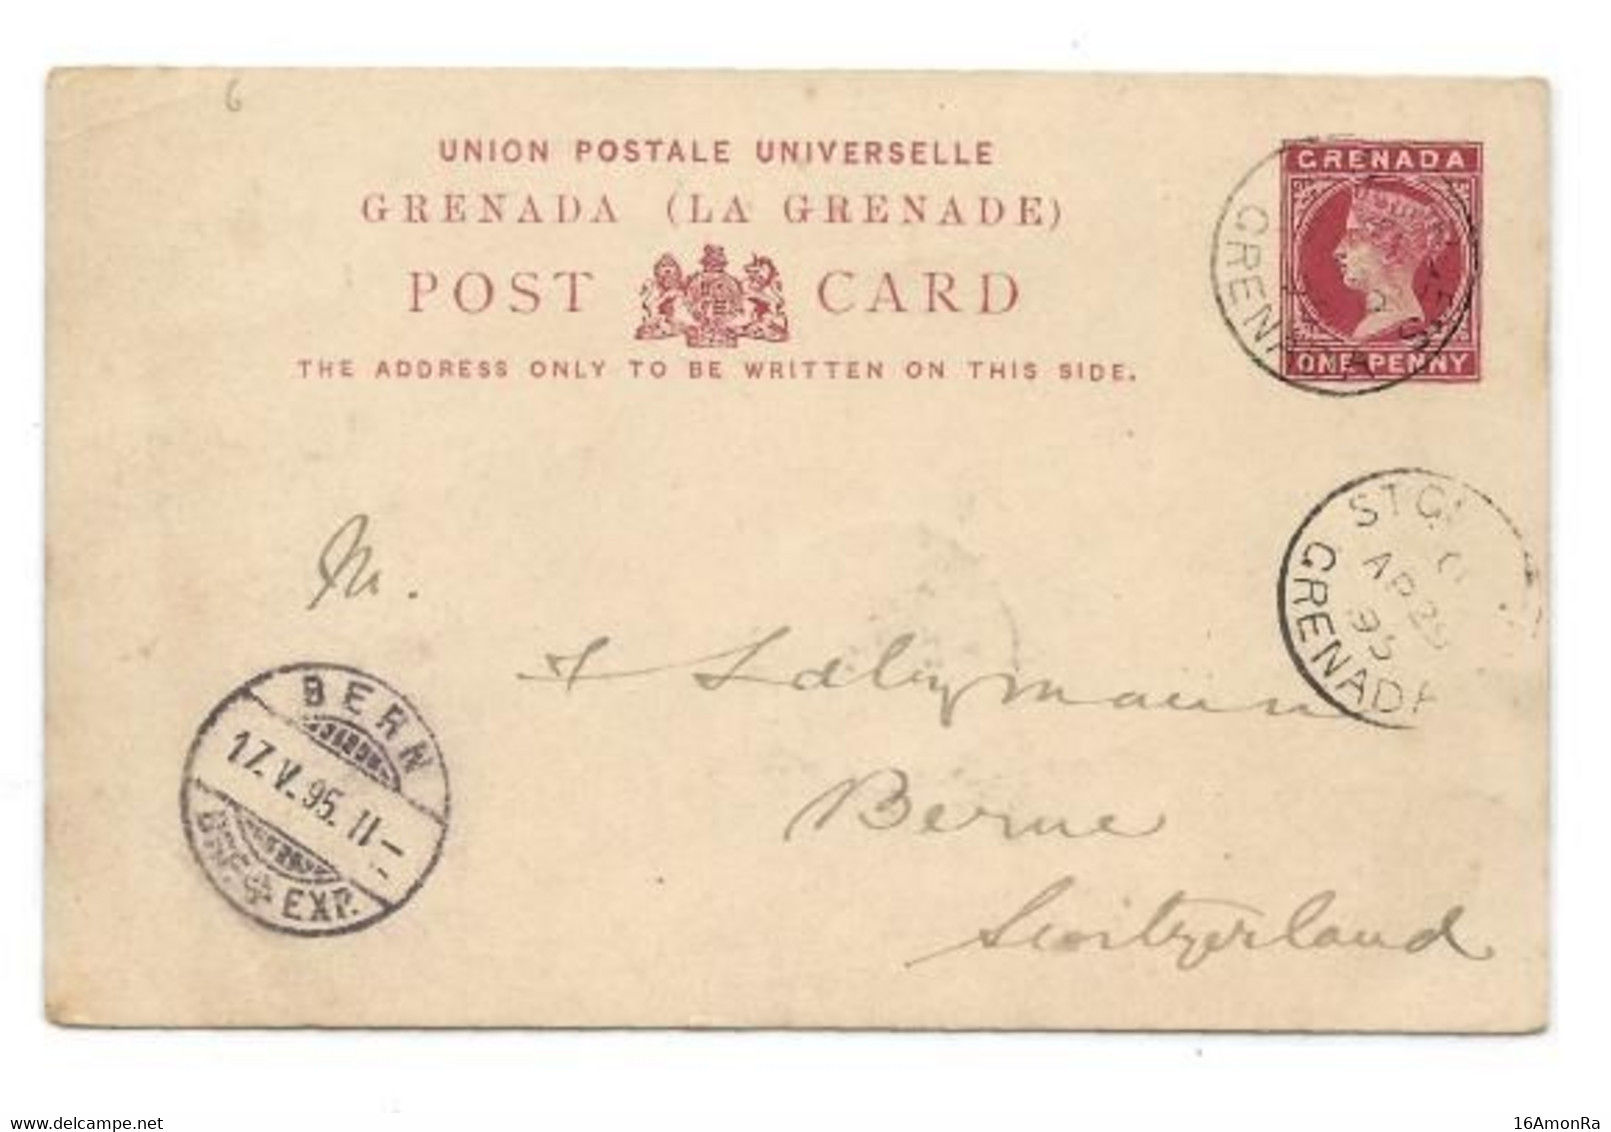 GRENADA E.P. Carte Postal Stationery Card 1p. Red On Light-cream, Cancelled St-GEORGES GRENADA APR.29 1895 to Bern (Swit - Grenada (...-1974)